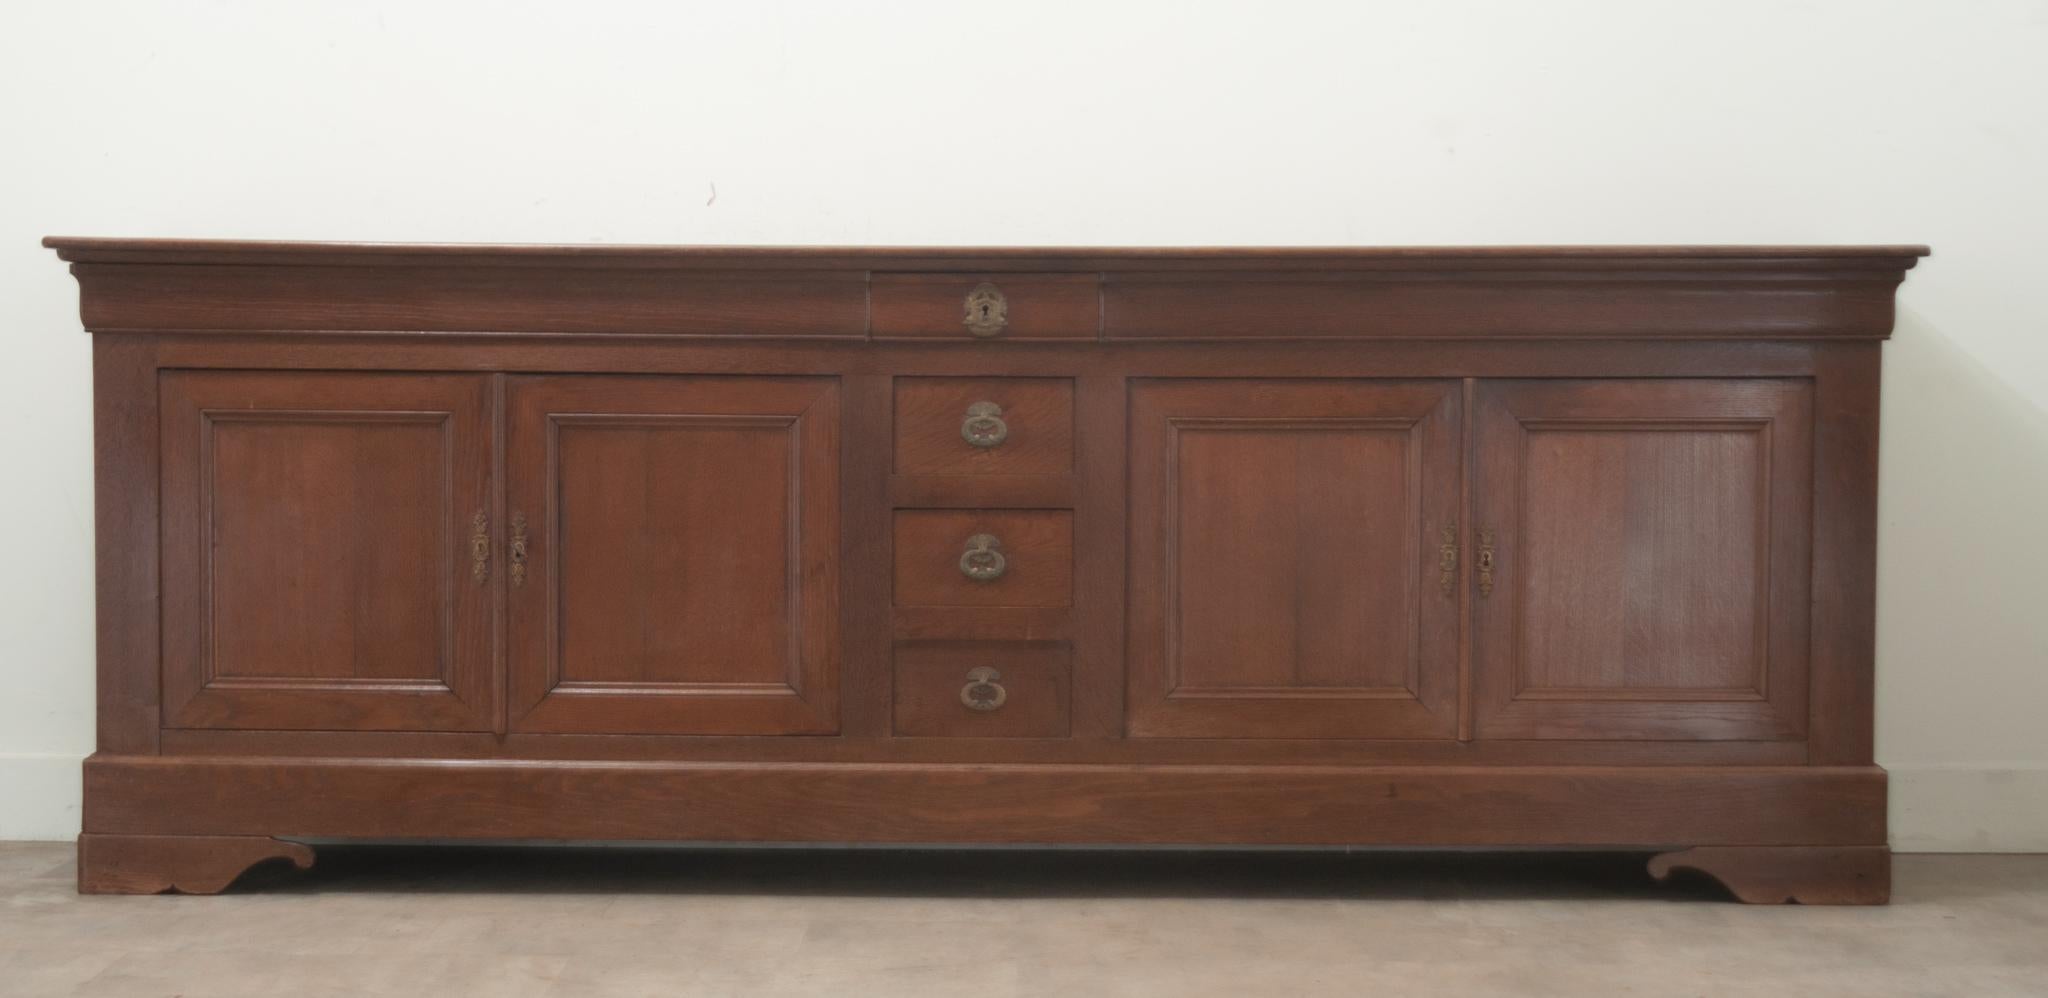 A massive over 9 feet long solid oak Louis Phillipe style French enfilade. The enfilade has a simple plank top. In the center of this case piece you’ll find three true drawers and one faux drawer flanked by two paneled doors. The interior opens with